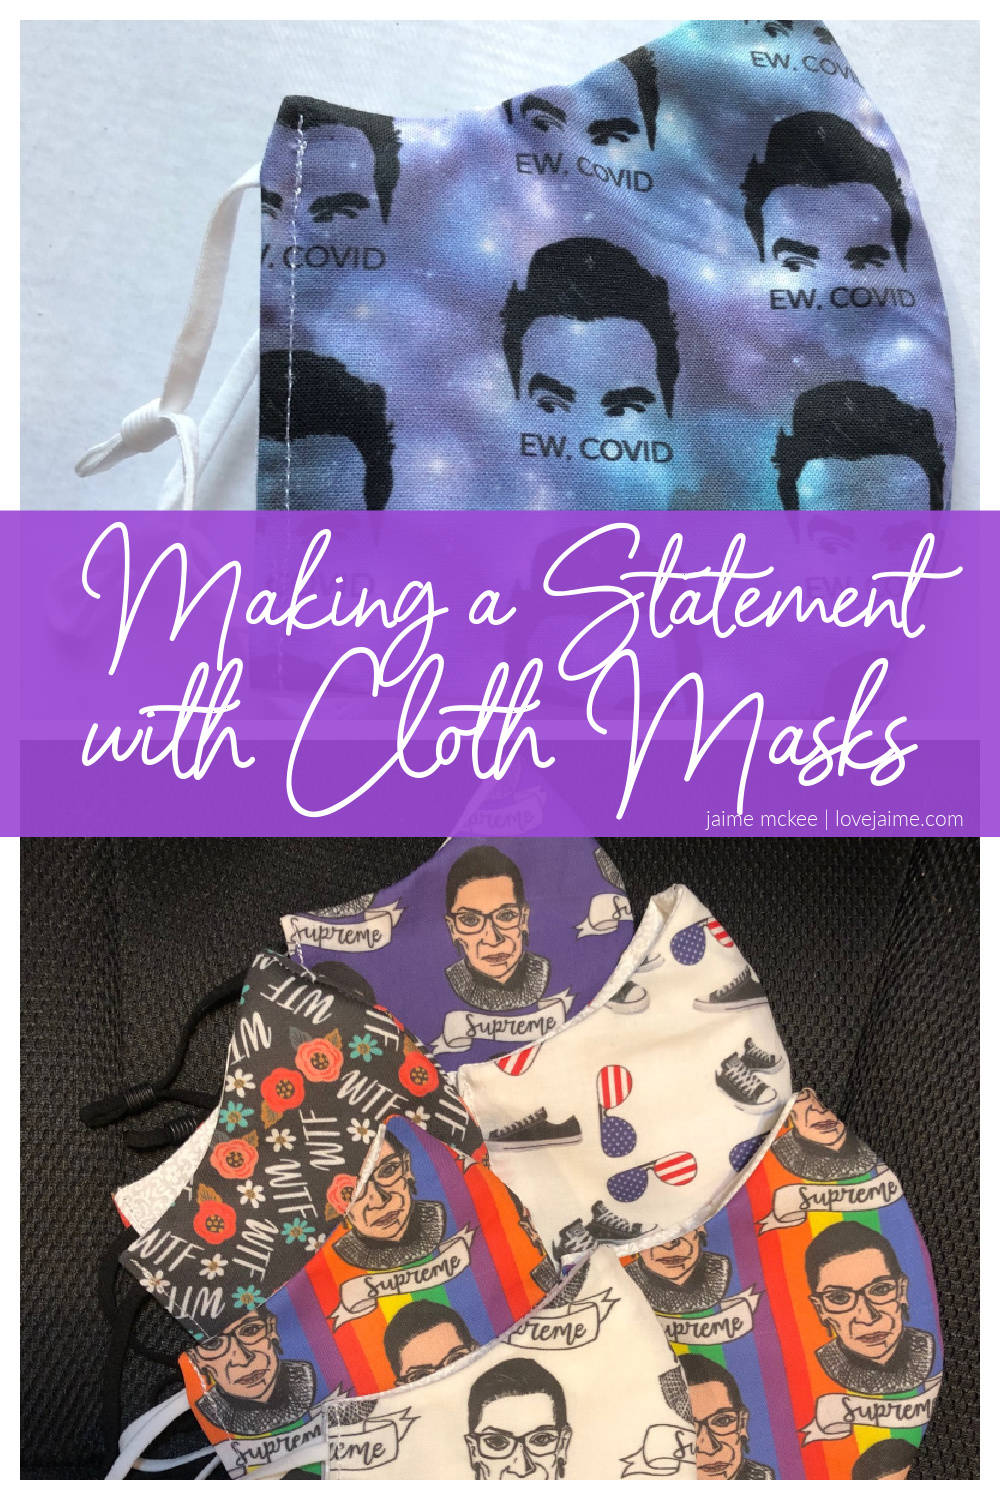 From Golden Girls to RBG (in a variety of colors) to Schitt's Creek, I have the masks for you now listed for sale online. Make a statement, while staying safer! #clothmasks #schittscreek #ewcovid #rbg